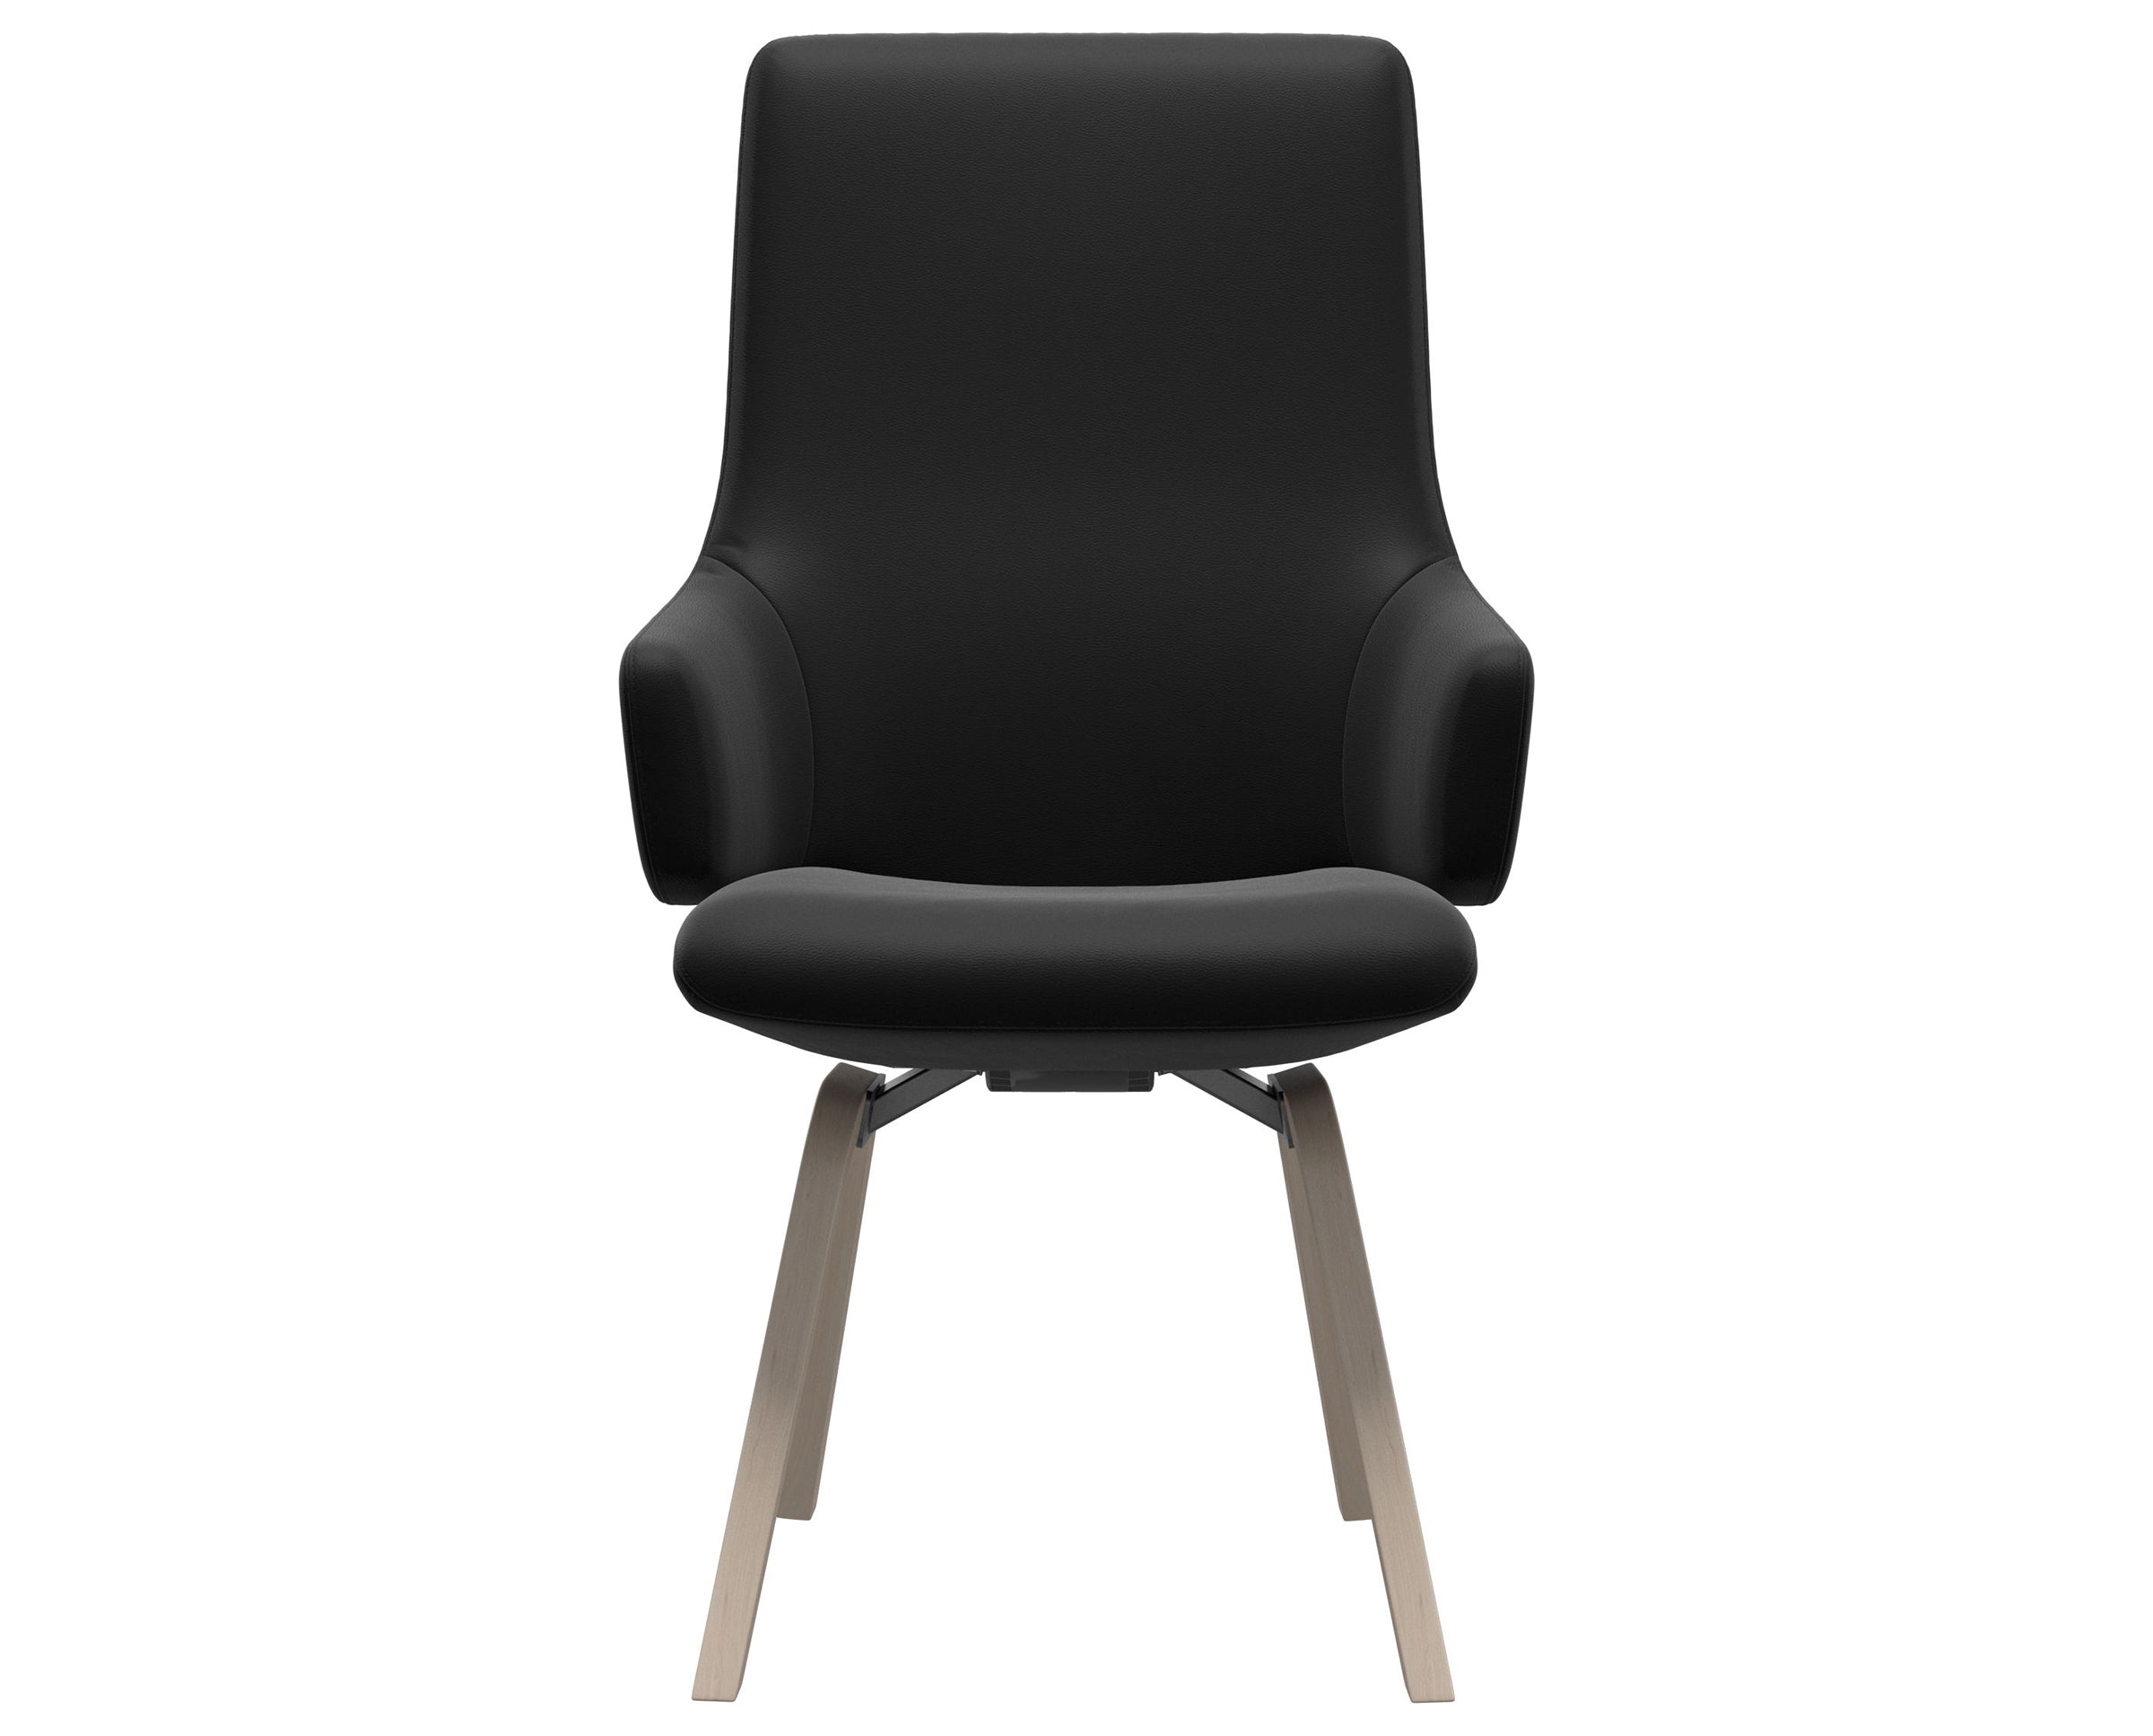 Paloma Leather Black and Whitewash Base | Stressless Laurel High Back D200 Dining Chair w/Arms | Valley Ridge Furniture